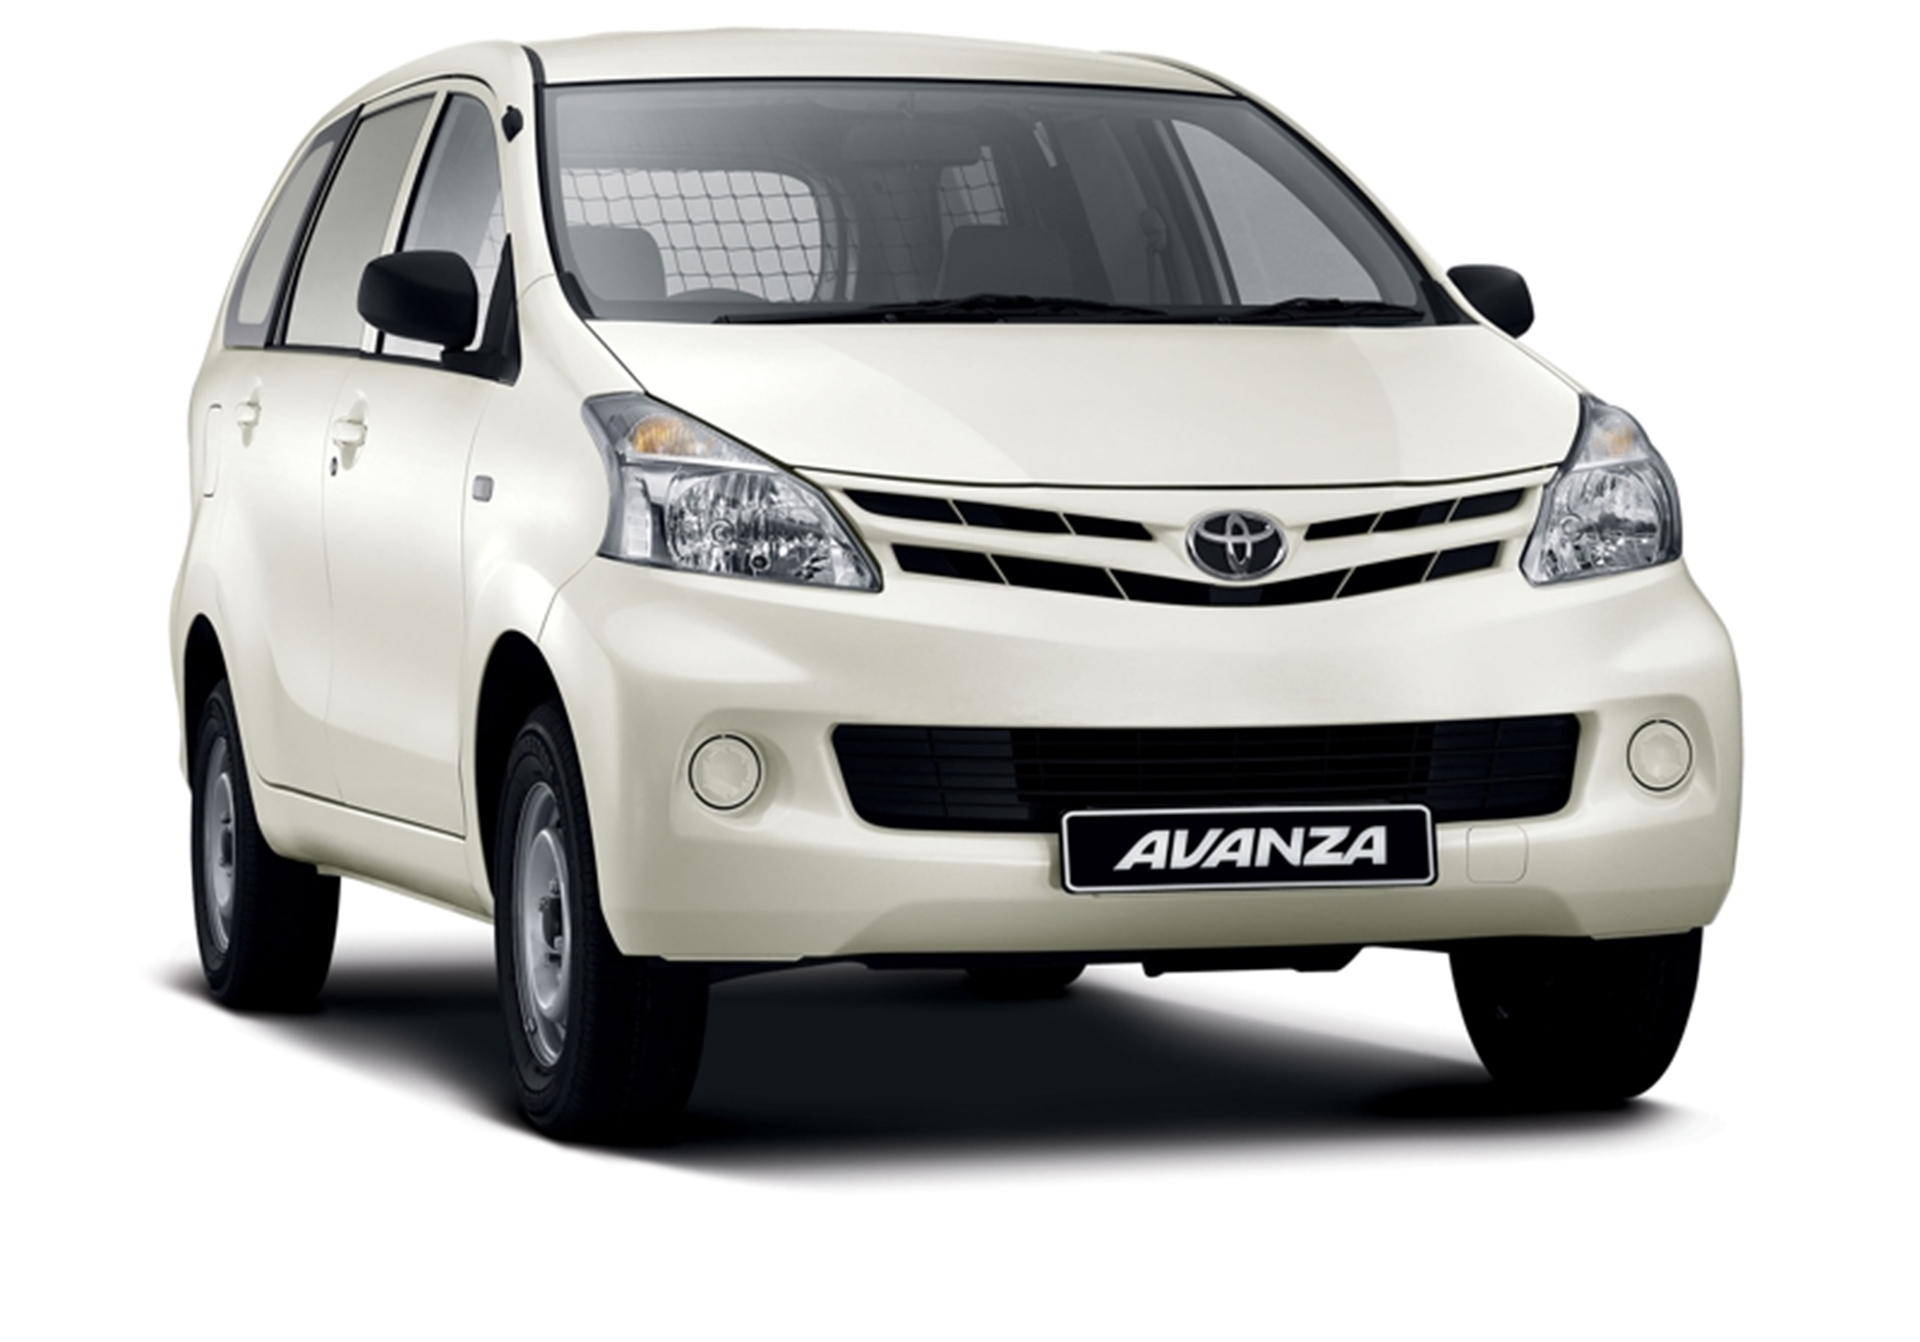 TOYOTA AVANZA PANEL VAN – MADE FOR BUSINESS